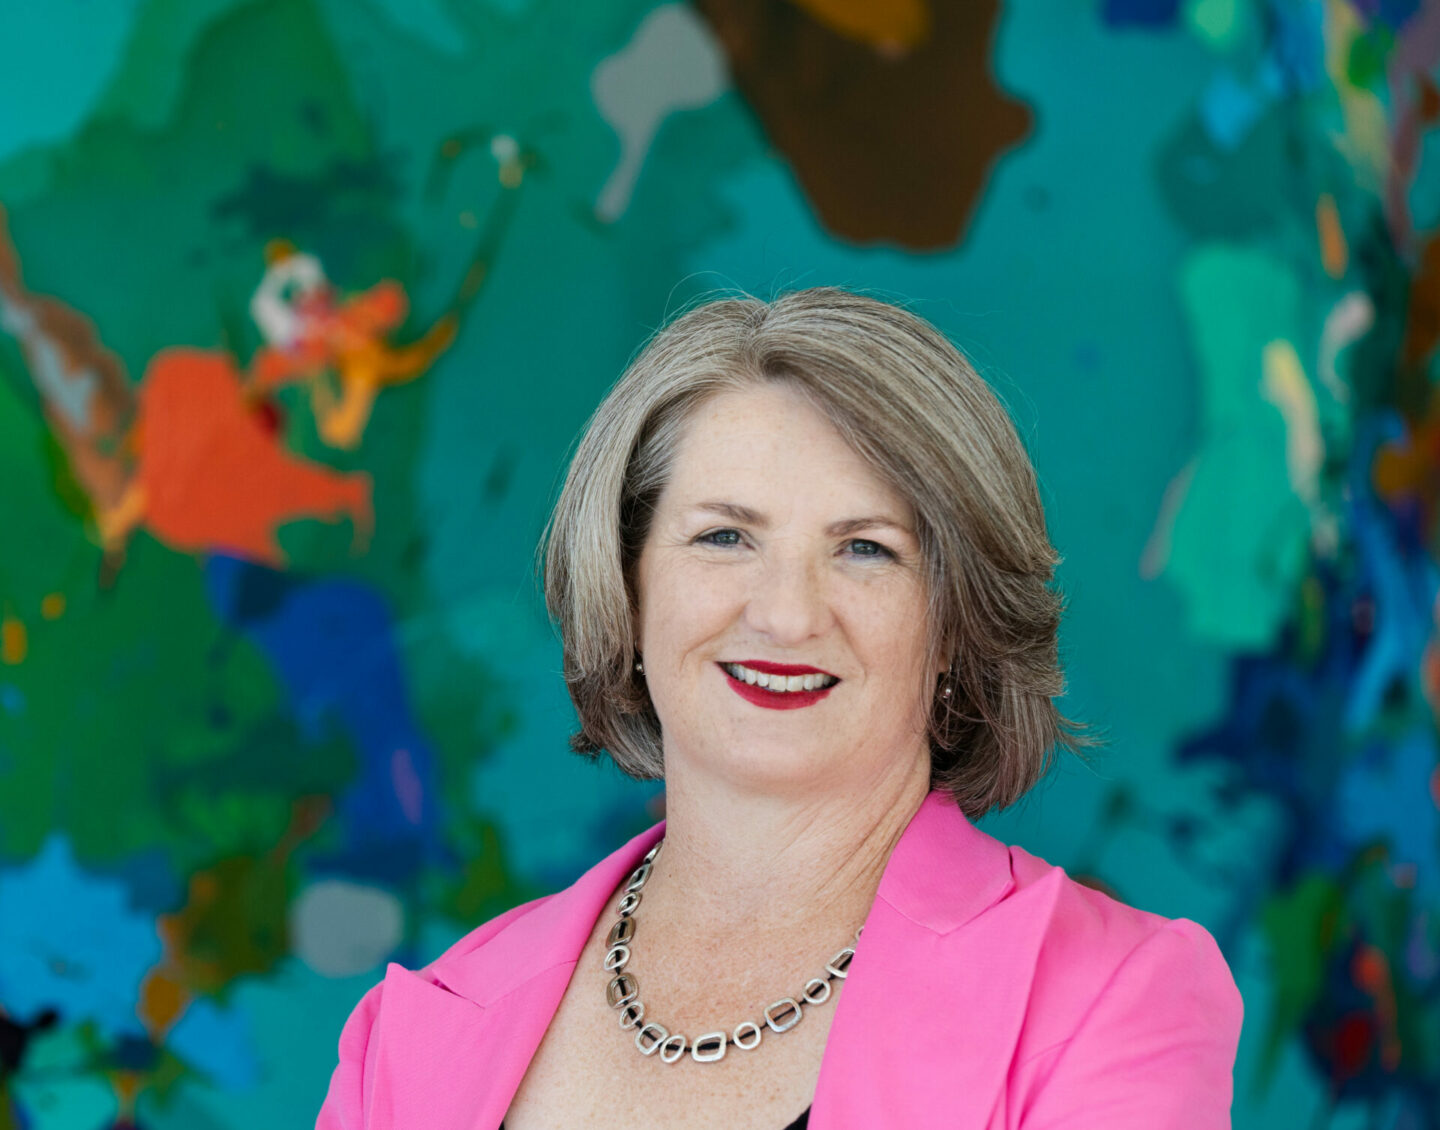 A short-haired white woman in a pink blazer smiles in front of a colourful background